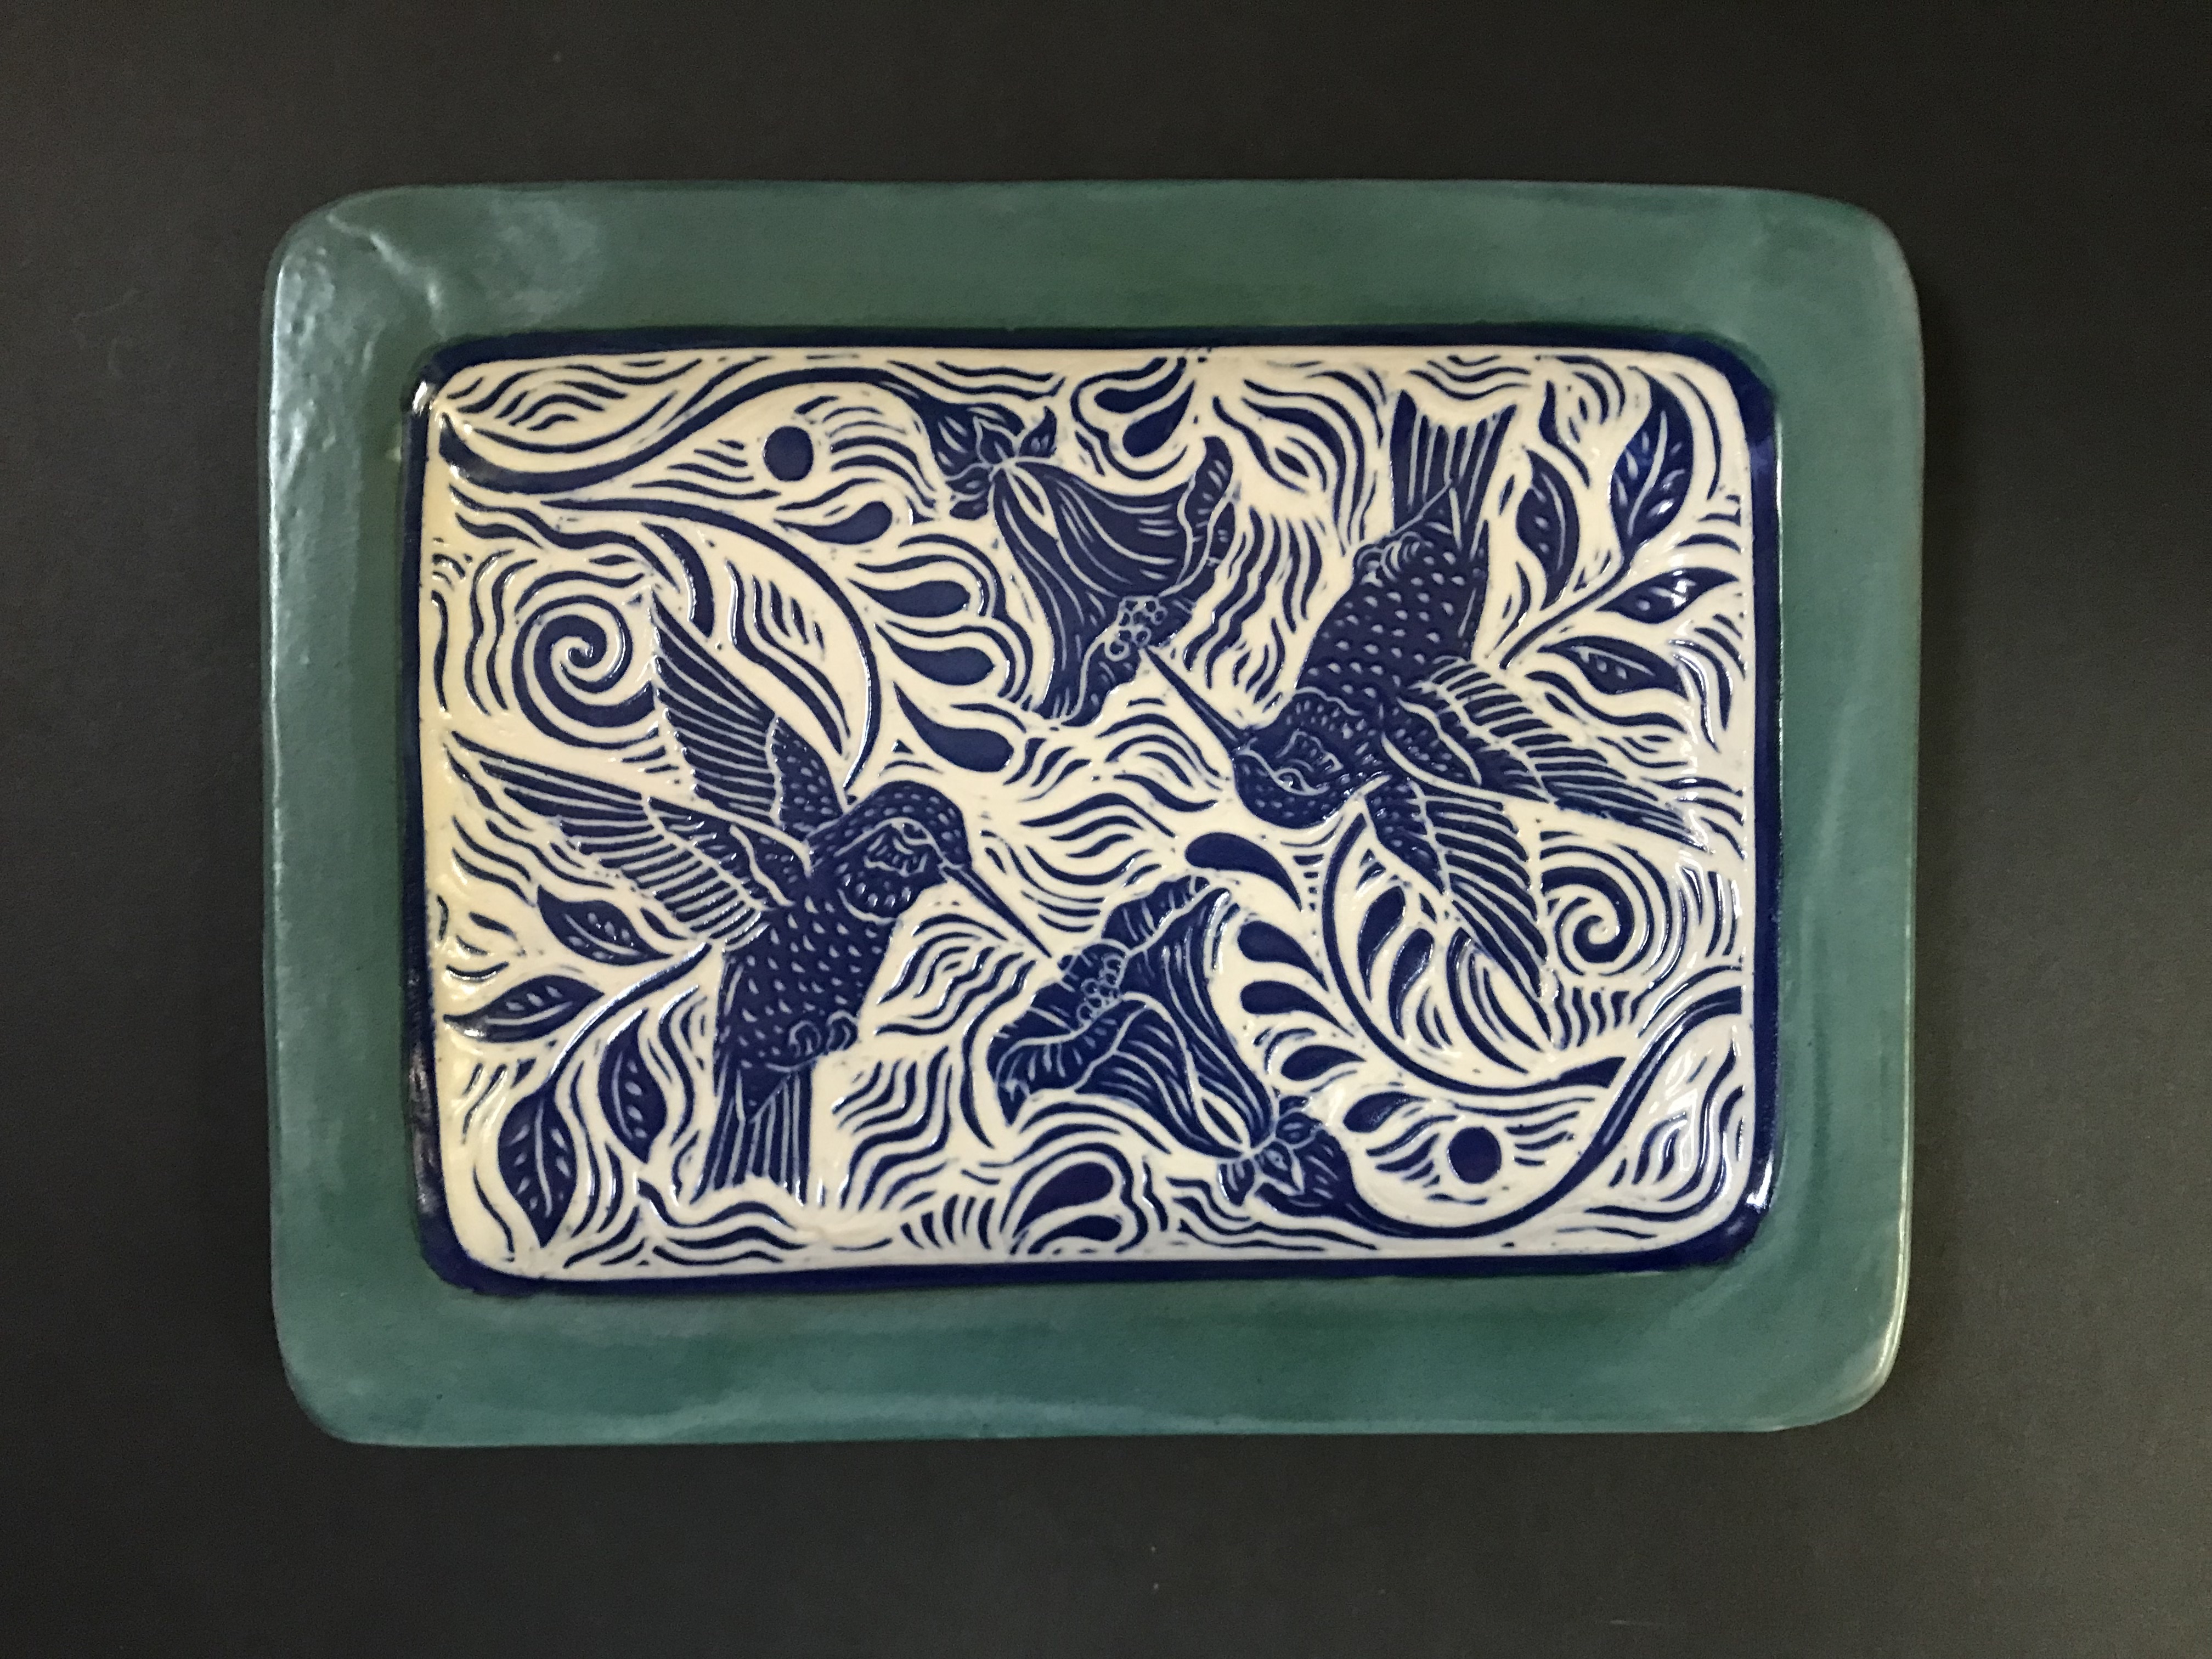 Ceramic Rectangular Serving Dish in Cobalt Blue, White, and Turquoise with Stylized Hummingbird Desgin